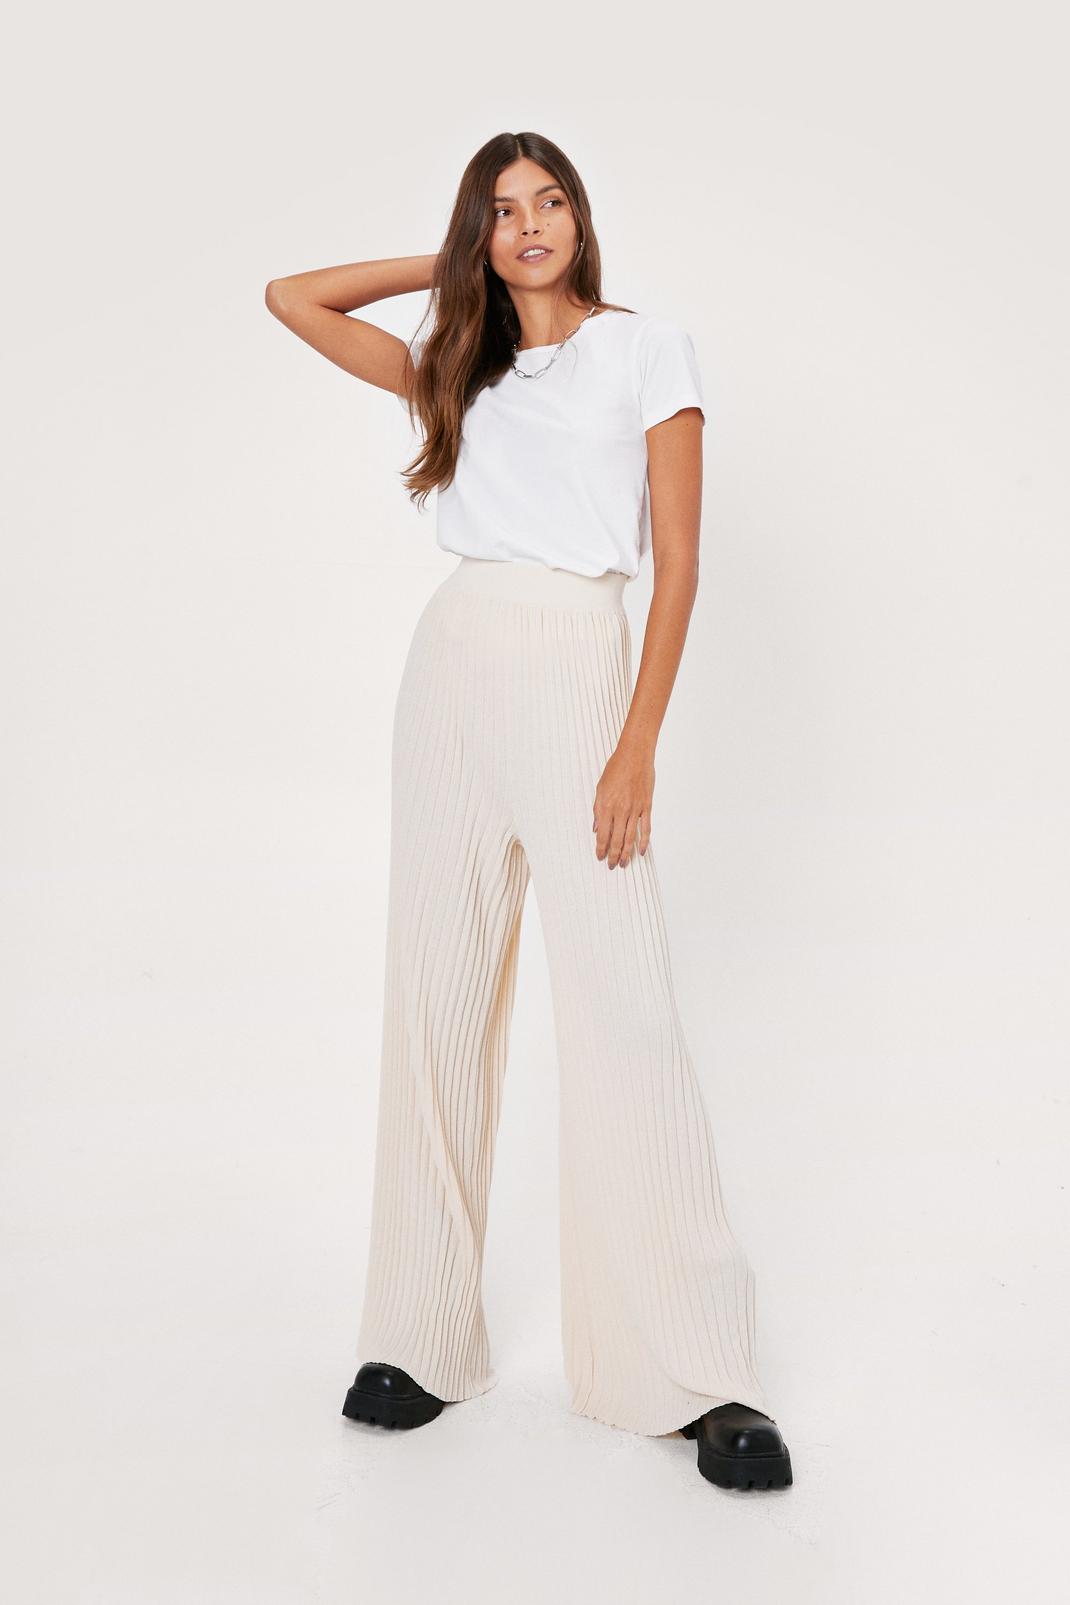 JLUXLABEL Shop The Half Dollar Pleated Pants (Available In, 49% OFF